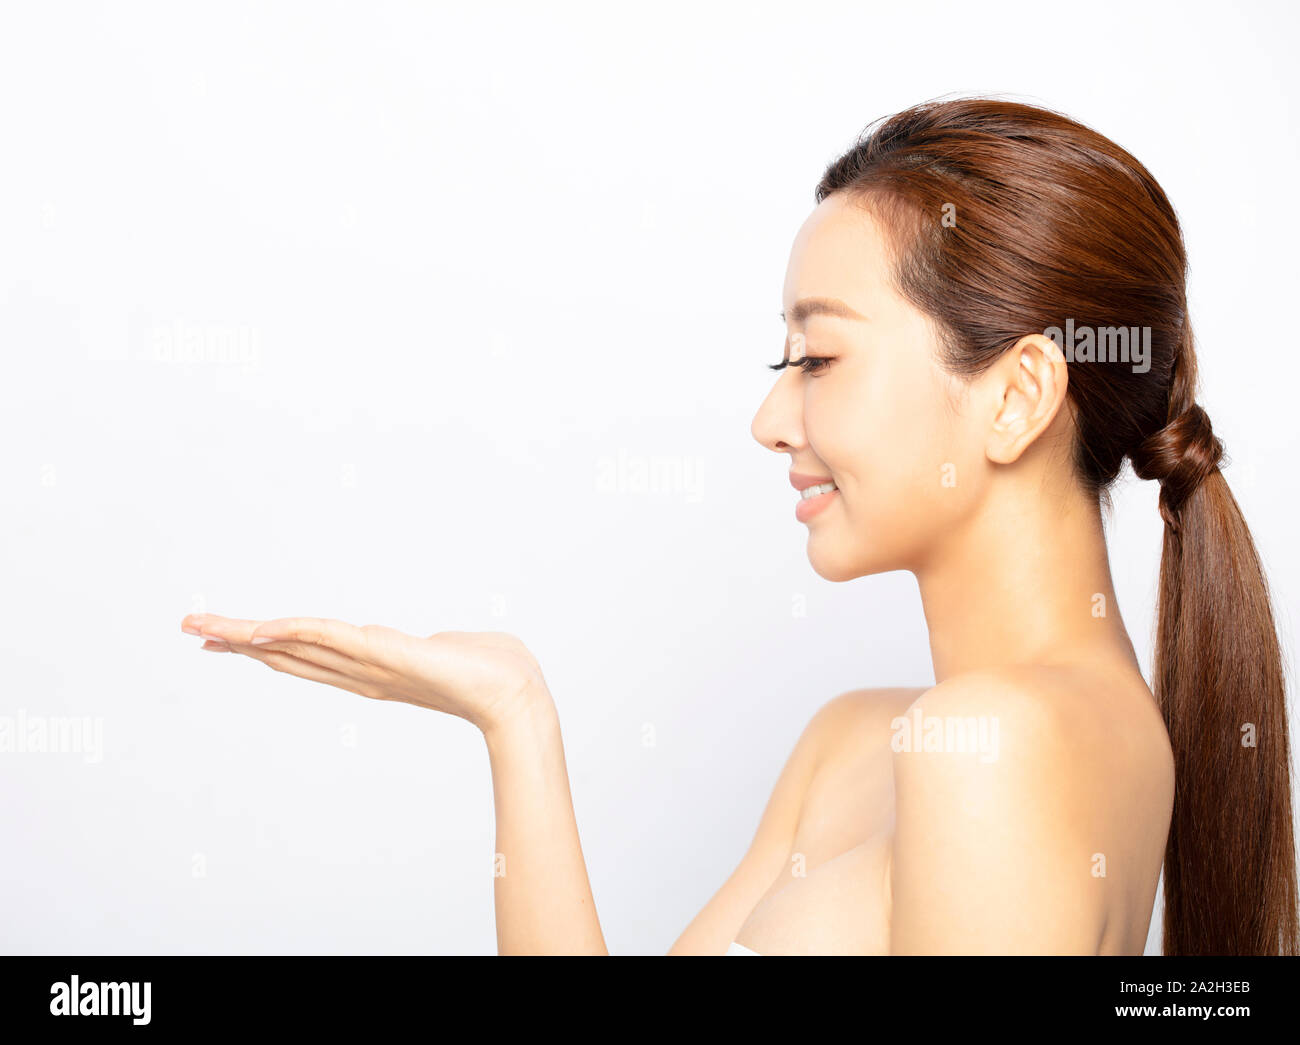 beauty Asian woman showing product on open hand Stock Photo